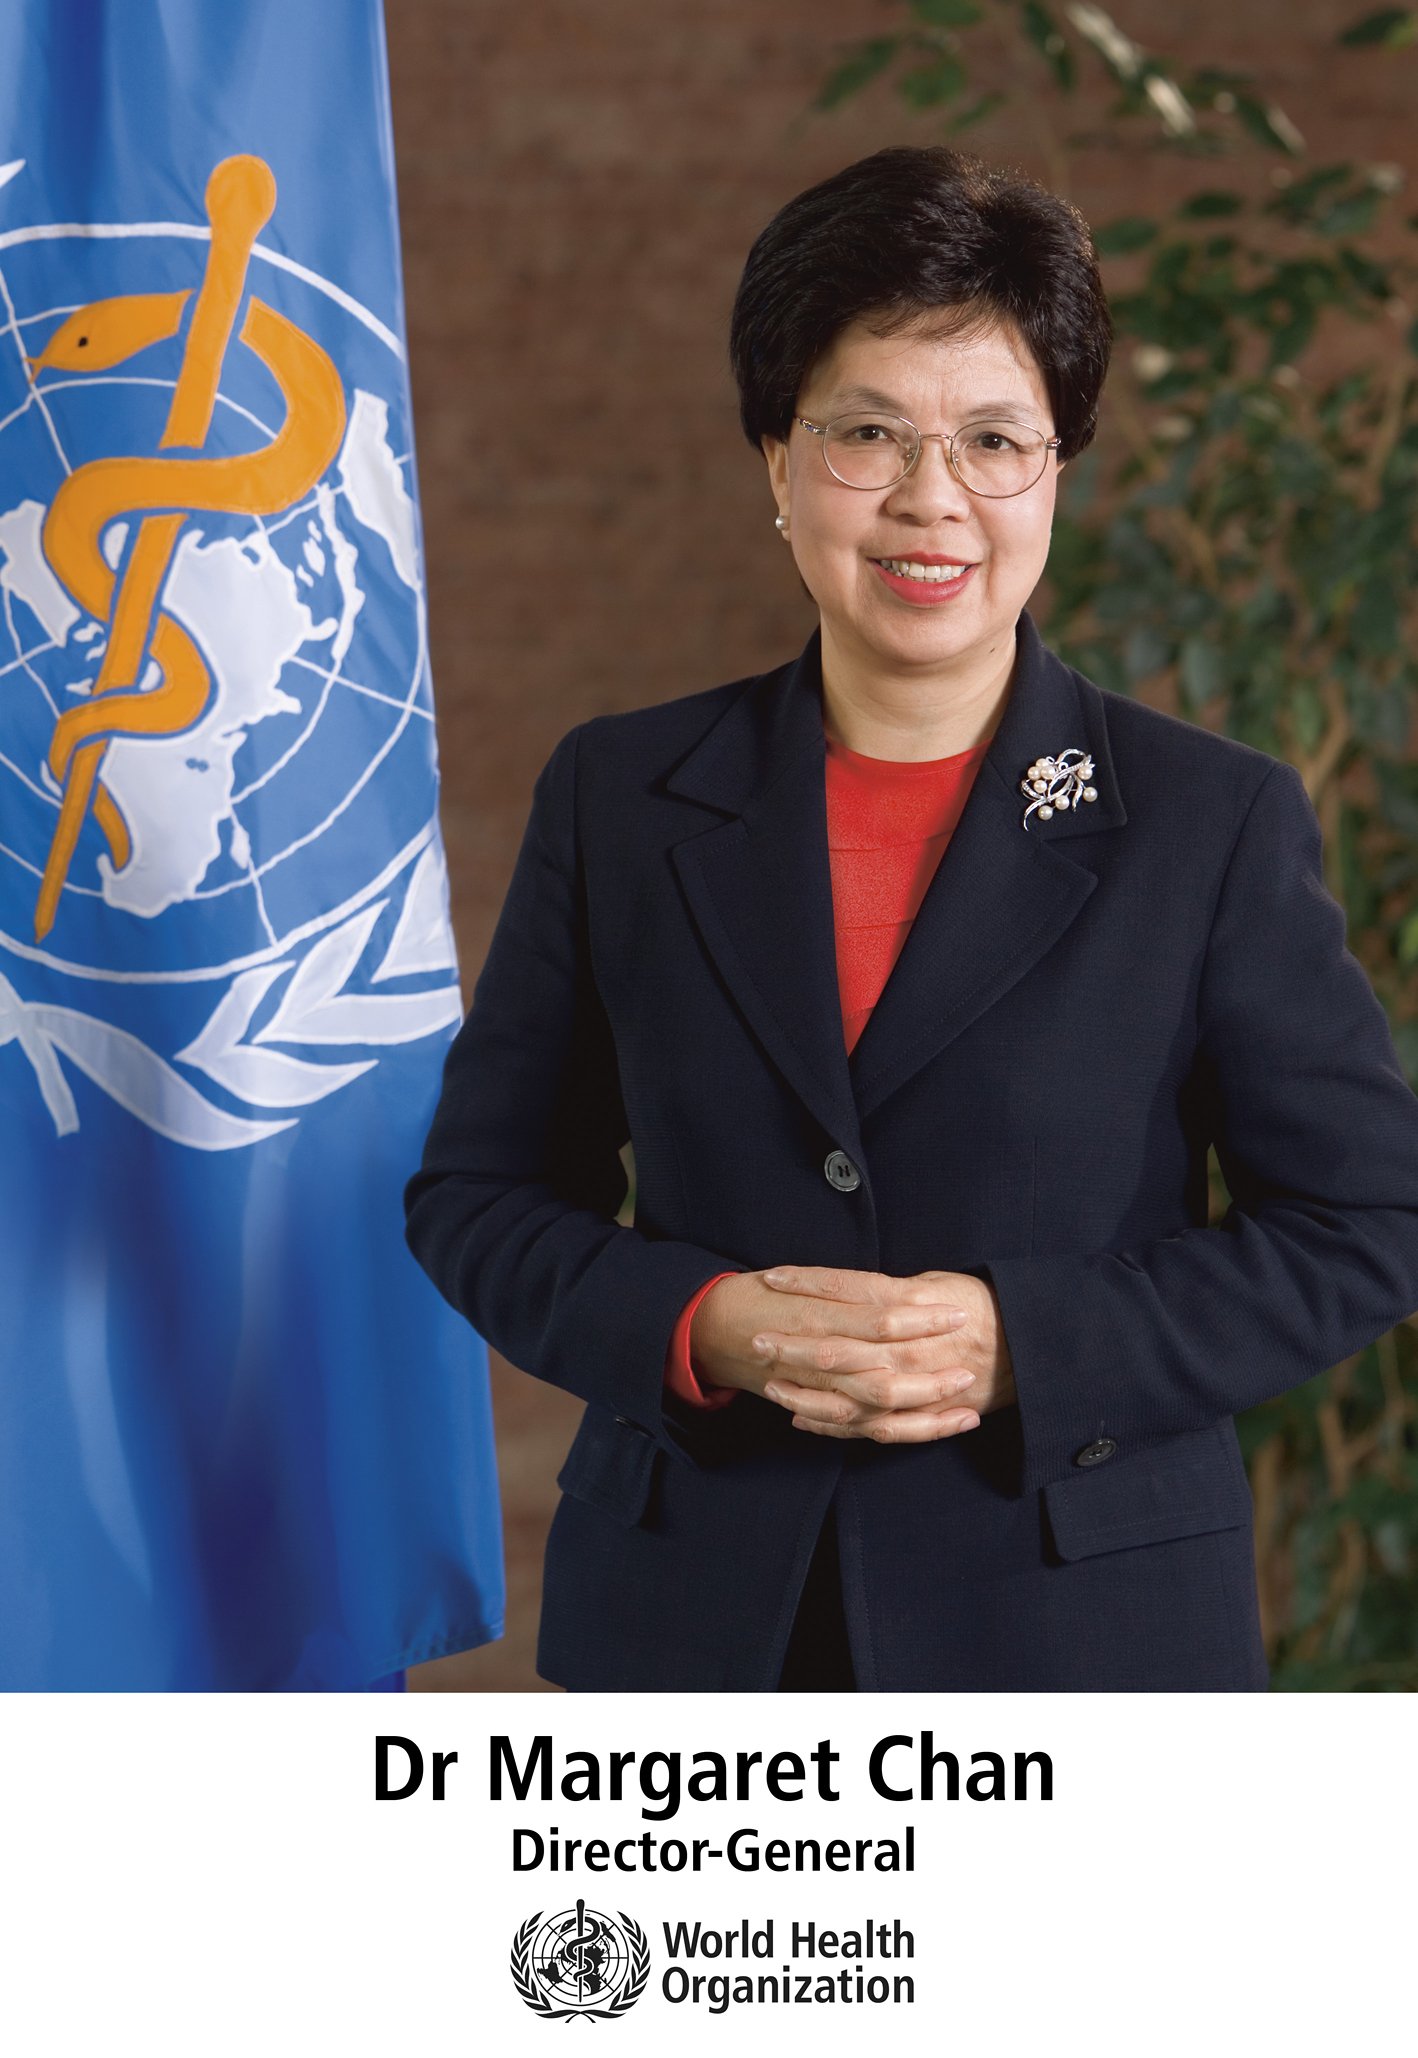 Dr Margaret Chan, director general, WHO recently adressed the BRICS health ministers' meeting